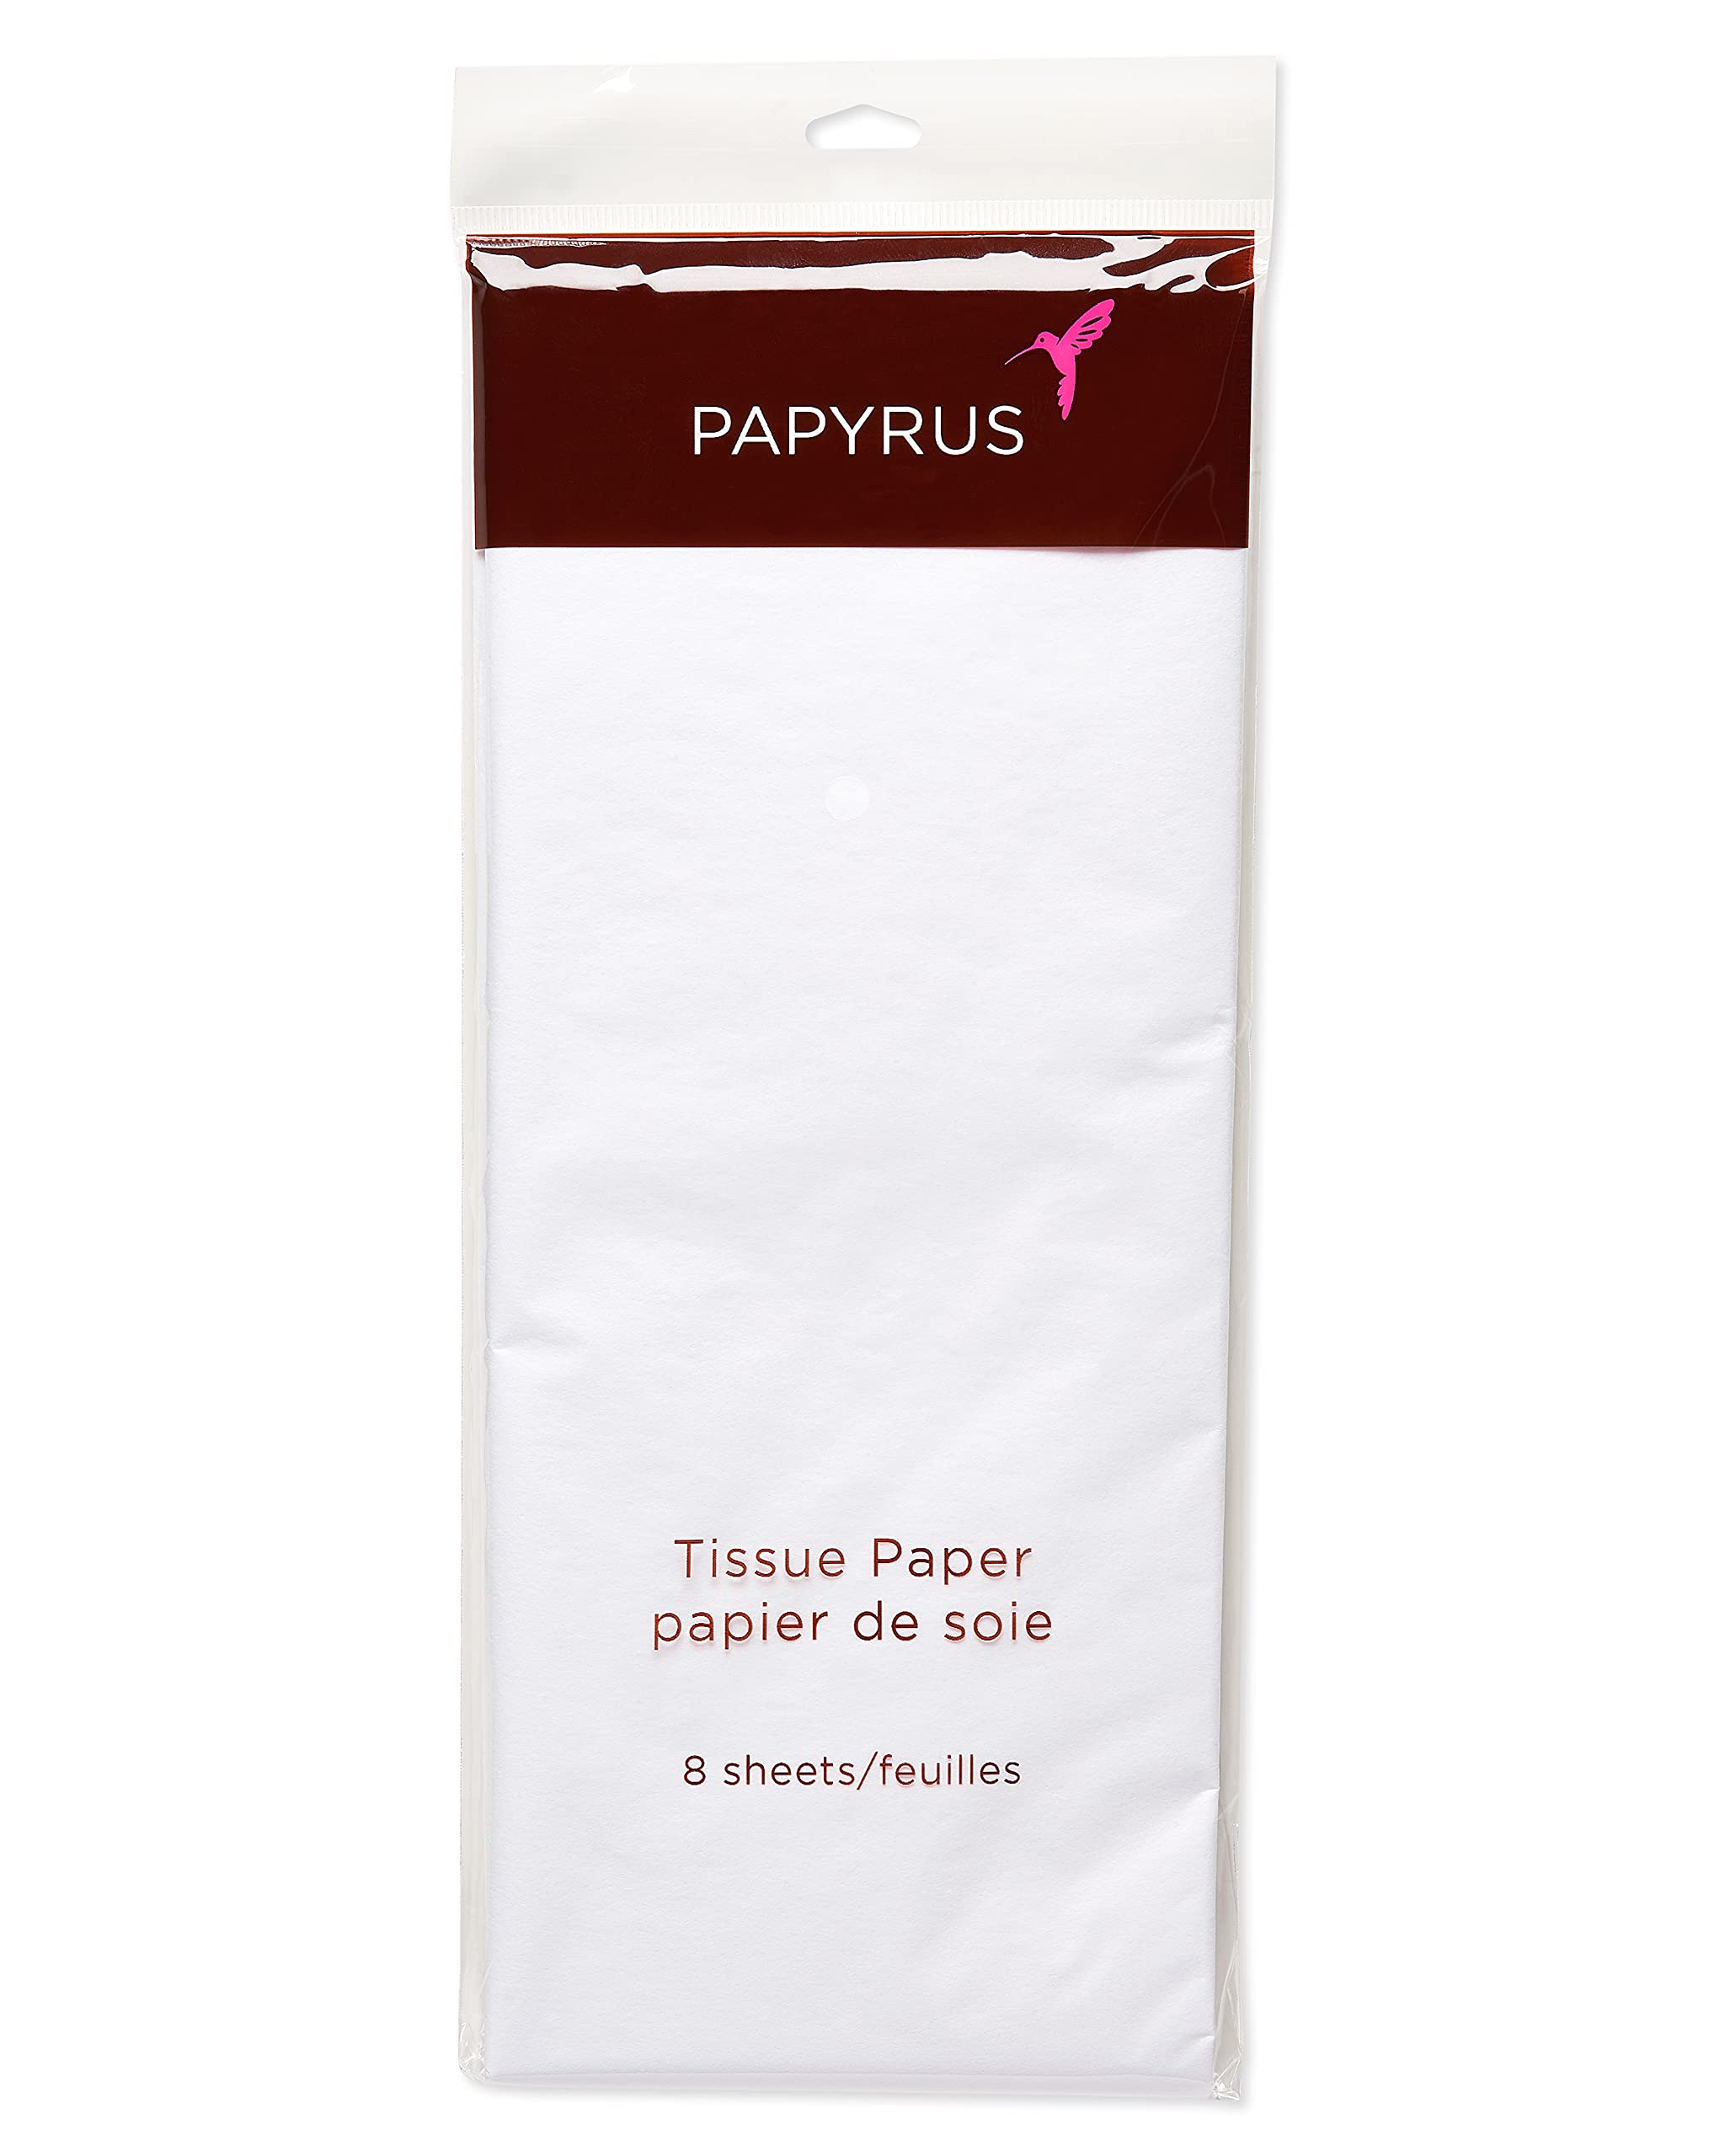 Papyrus 8 Sheet White Tissue Paper for Gifts, Decorations, Crafts, DIY and More